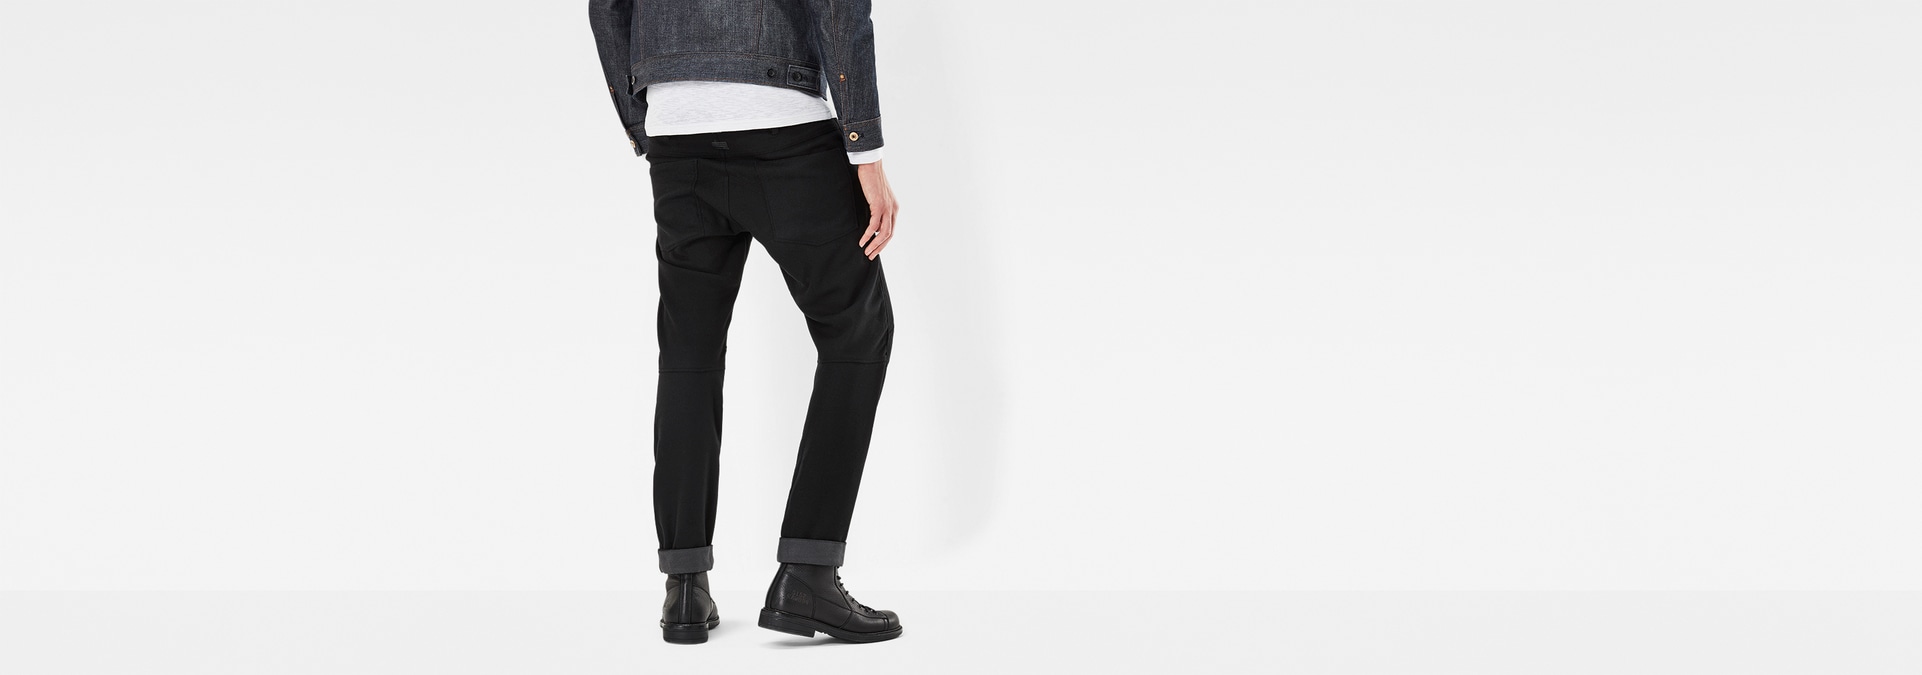 G-Star RAW | Men | Color Jeans | 5620 G-star Elwood Wool 3d Tapered ...